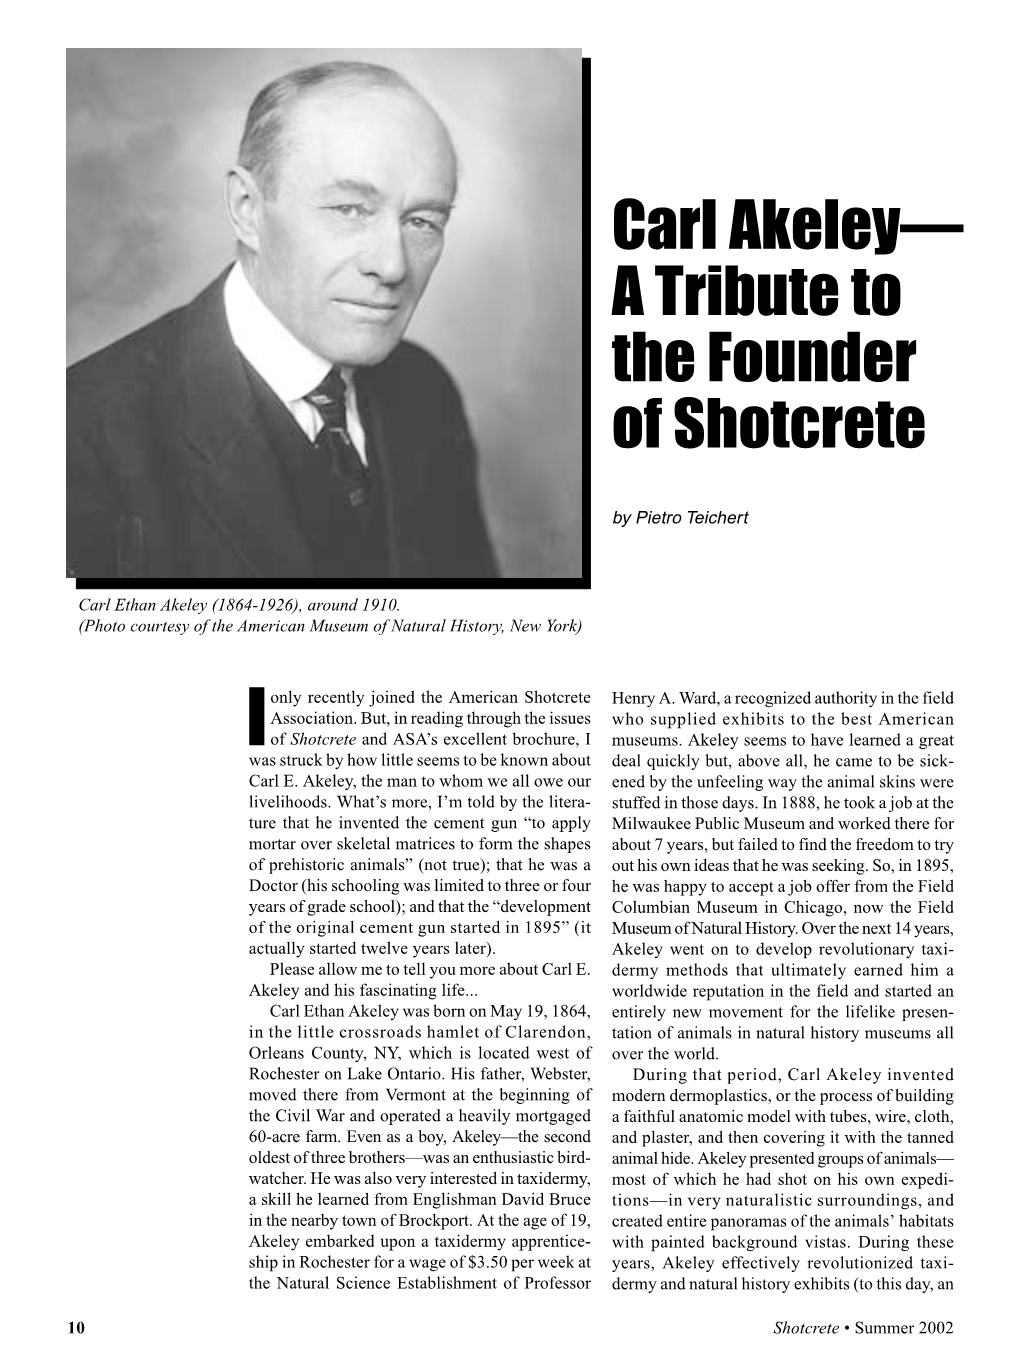 Carl Akeley— a Tribute to the Ounder of Shotcrete